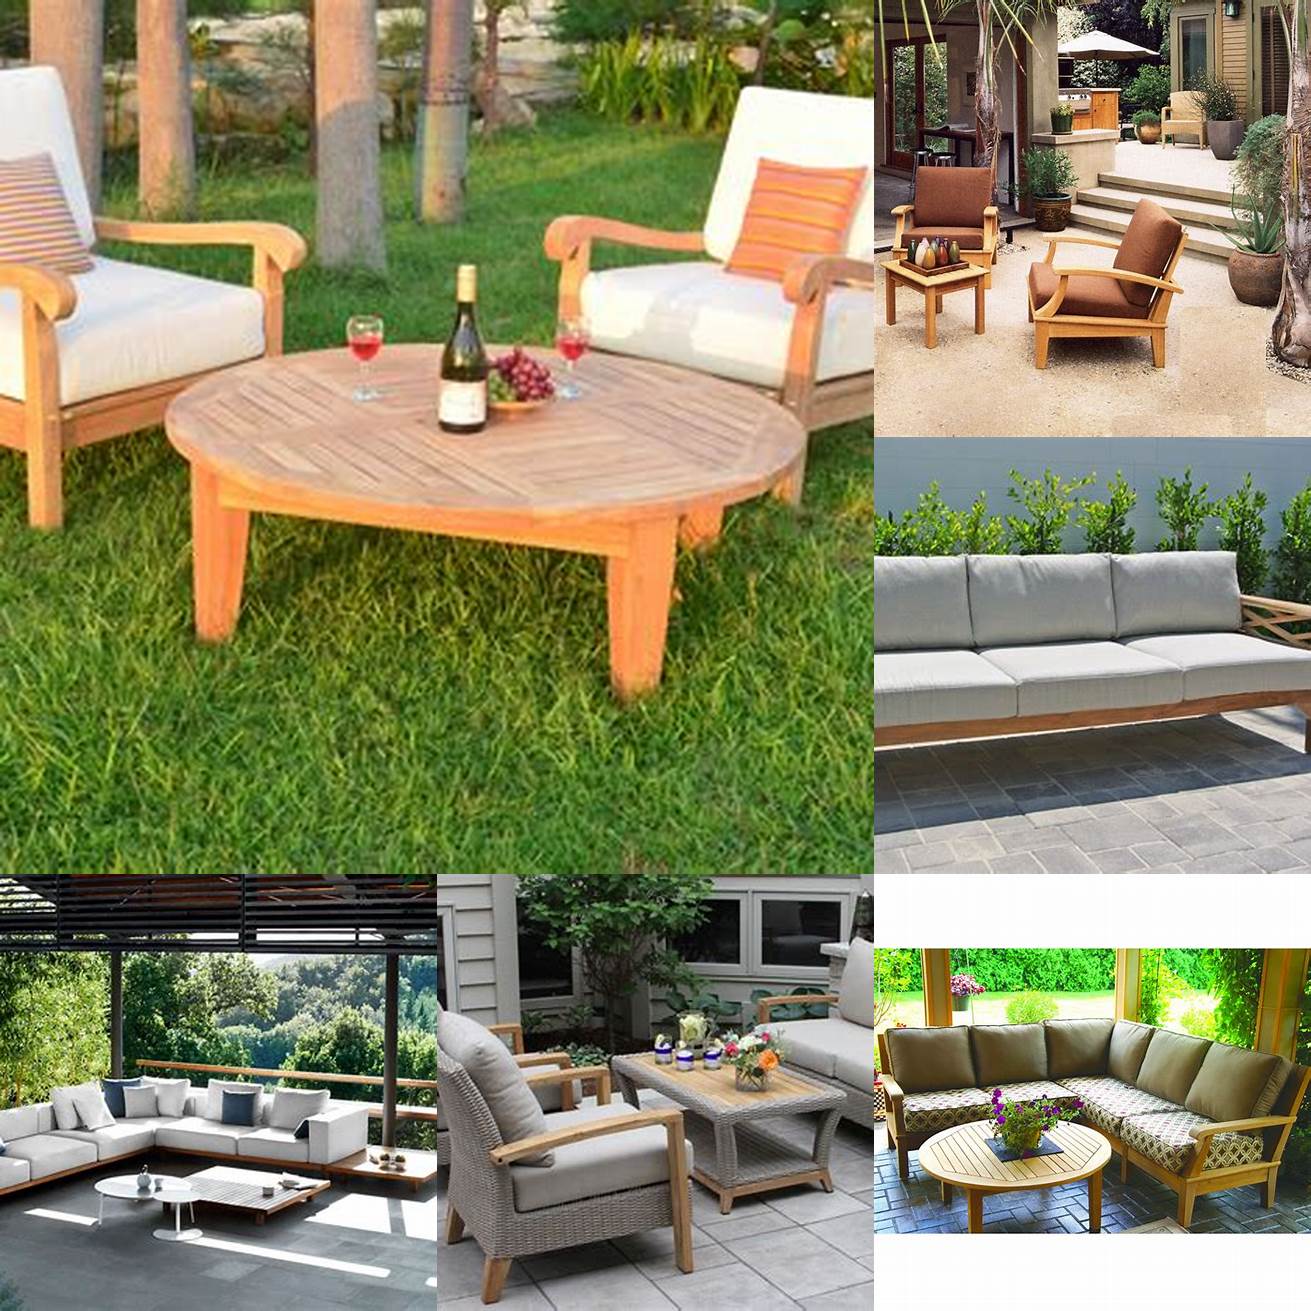 A picture of RHF Divano Teak furniture in a traditional outdoor space